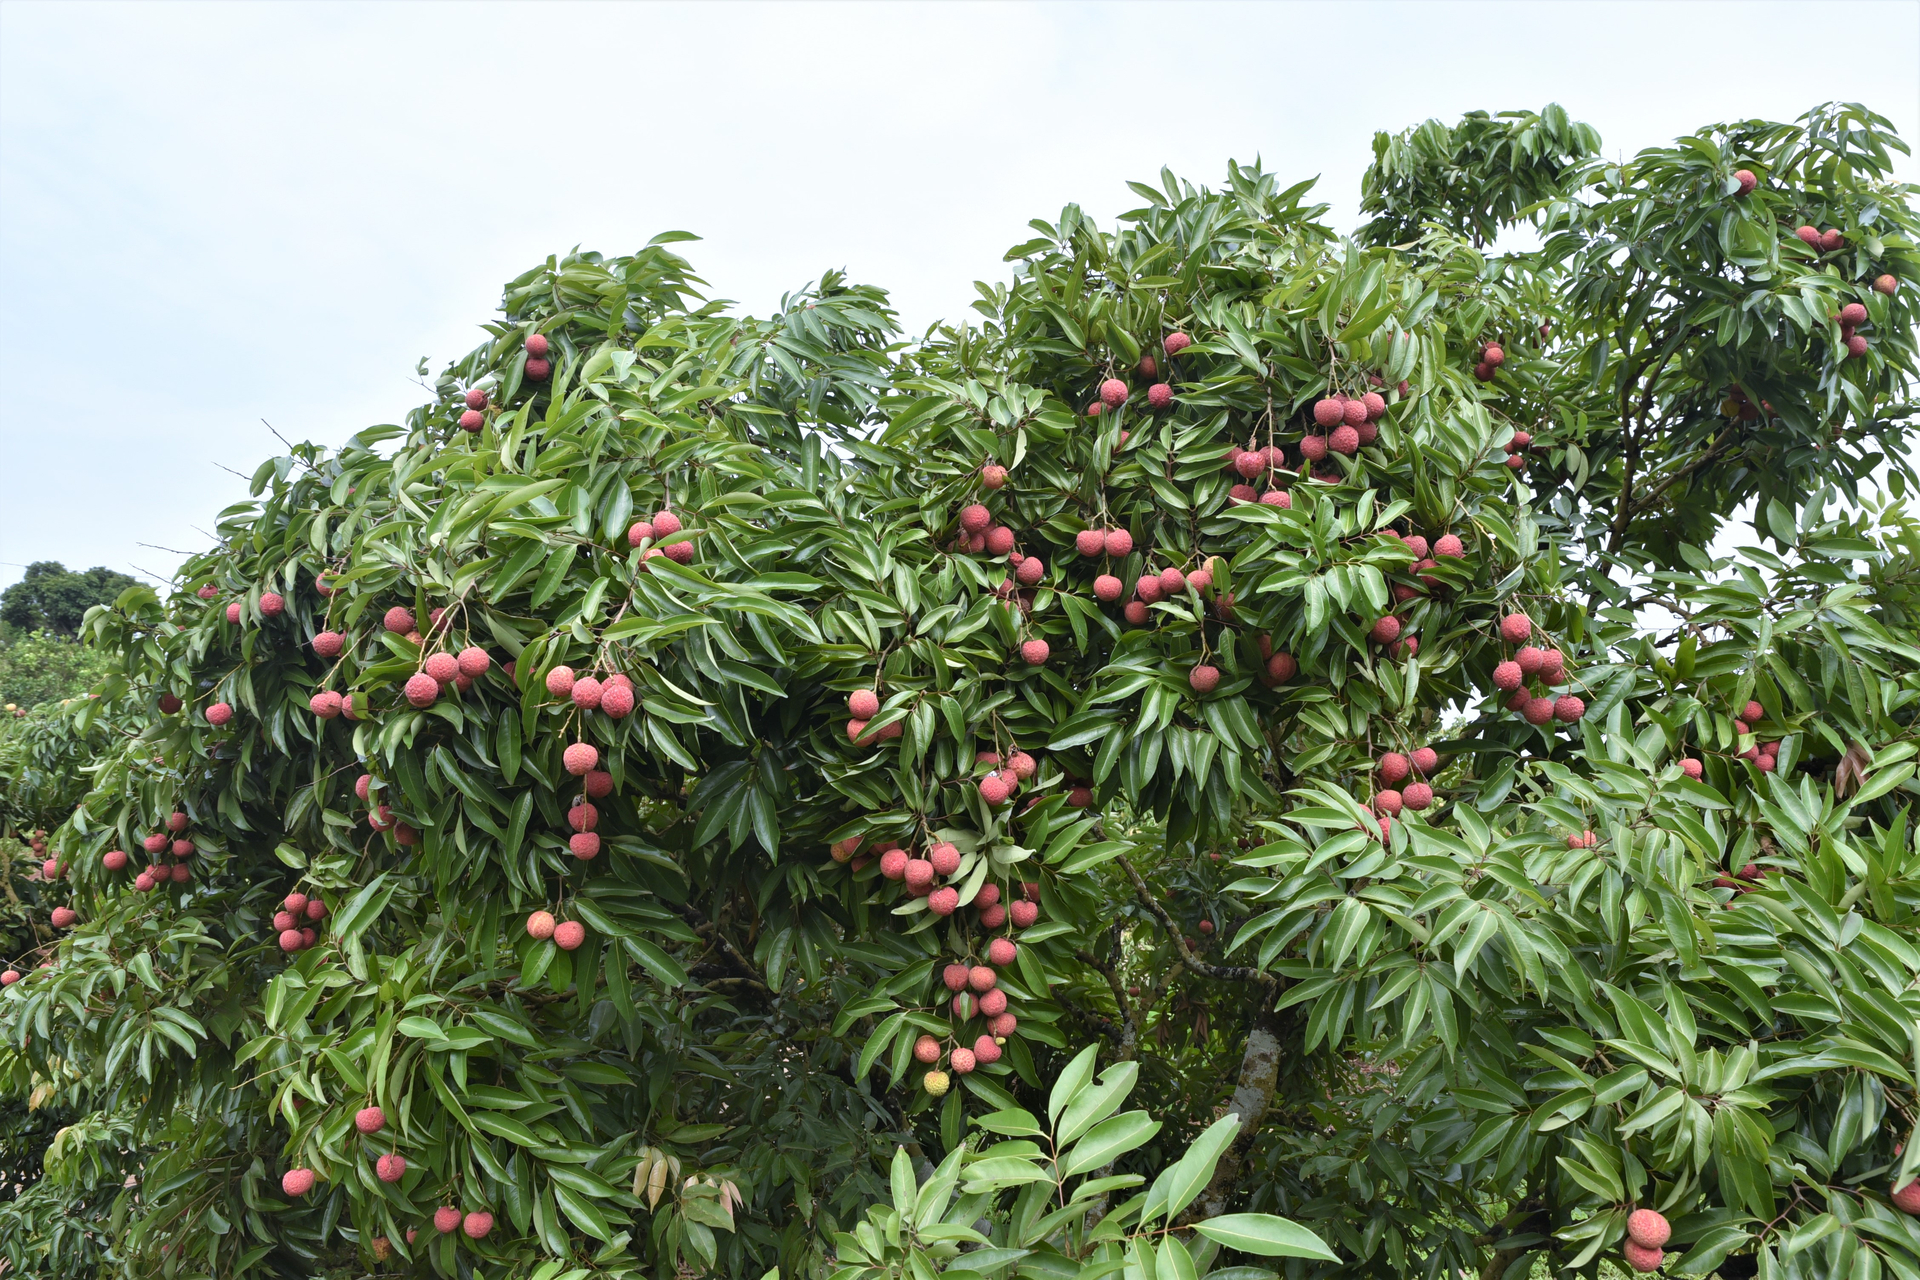 Organic lychee farm in Quy Son commune, Luc Ngan district, Bac Giang province. Photo:  Pham Hieu.